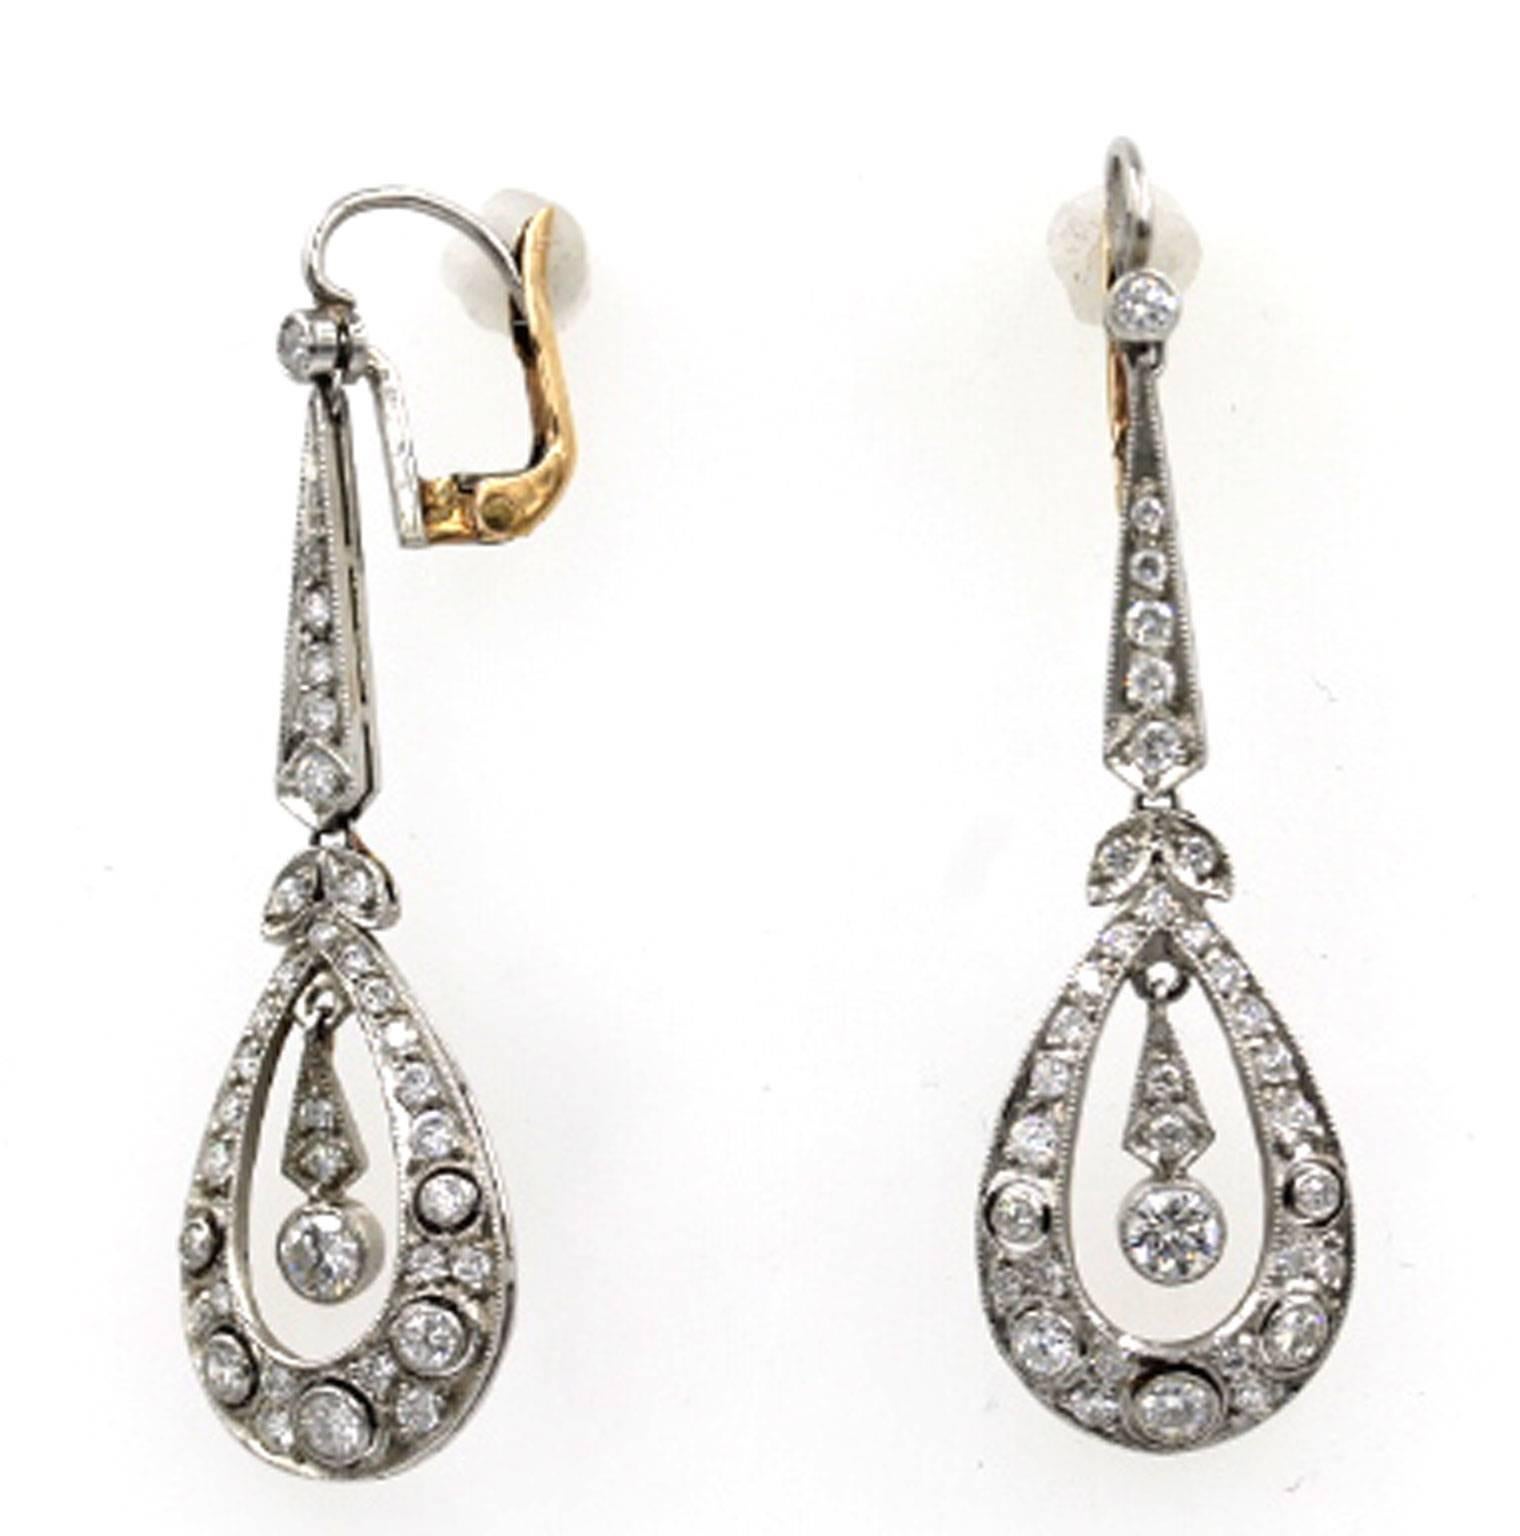 These stunning diamond drop earrings are fashioned in platinum and 18 karat gold. There are approximately 1 1/4 carat total weight of diamonds. They measure 2 inches in length, and 1/2 inches in width. 